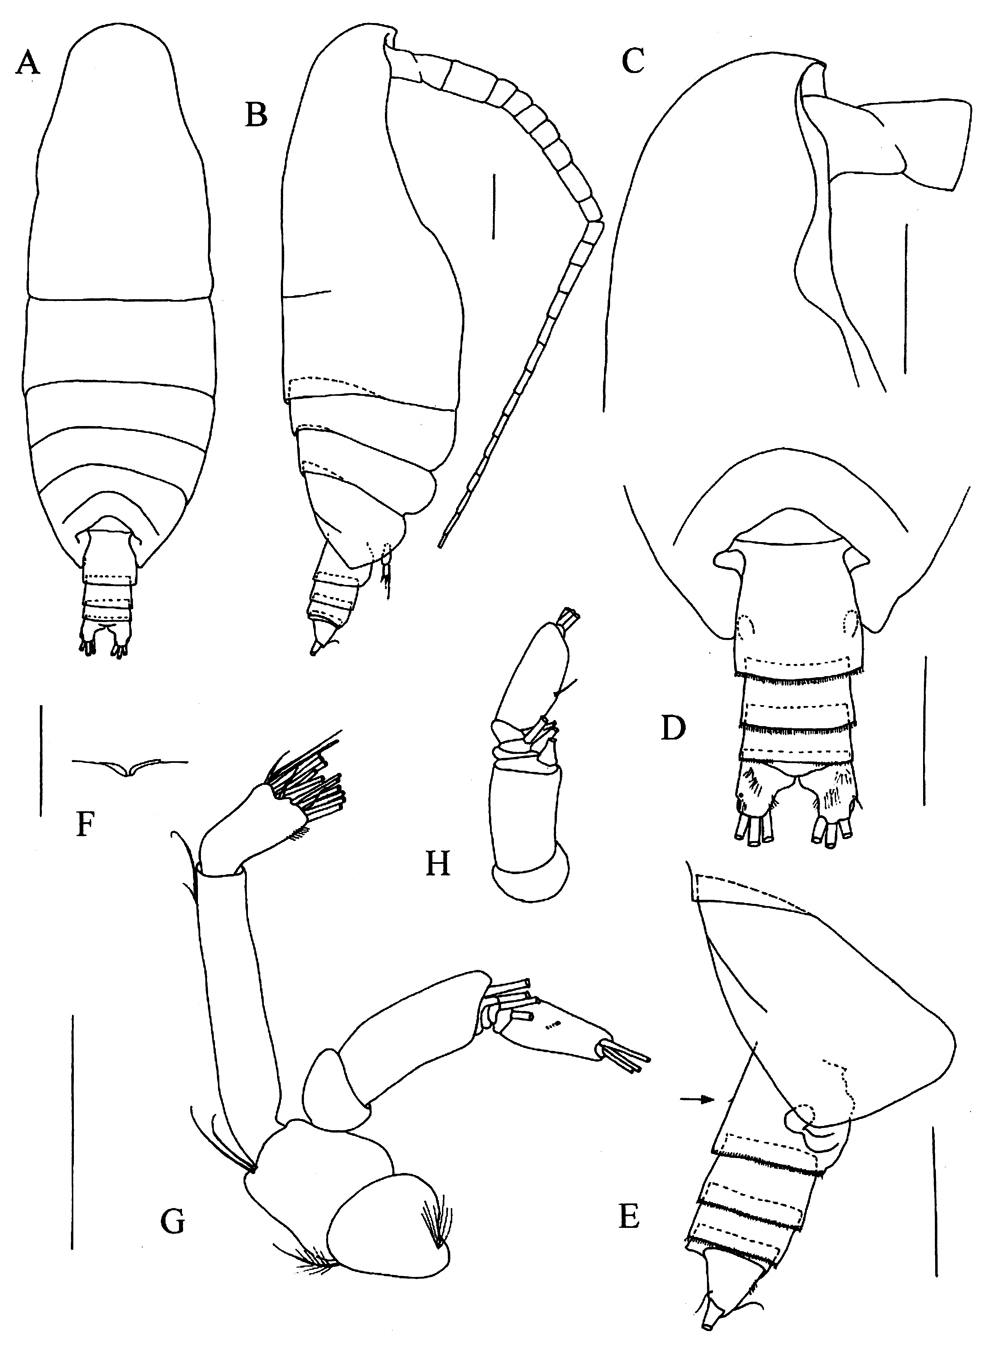 Species Xancithrix ohmani - Plate 1 of morphological figures